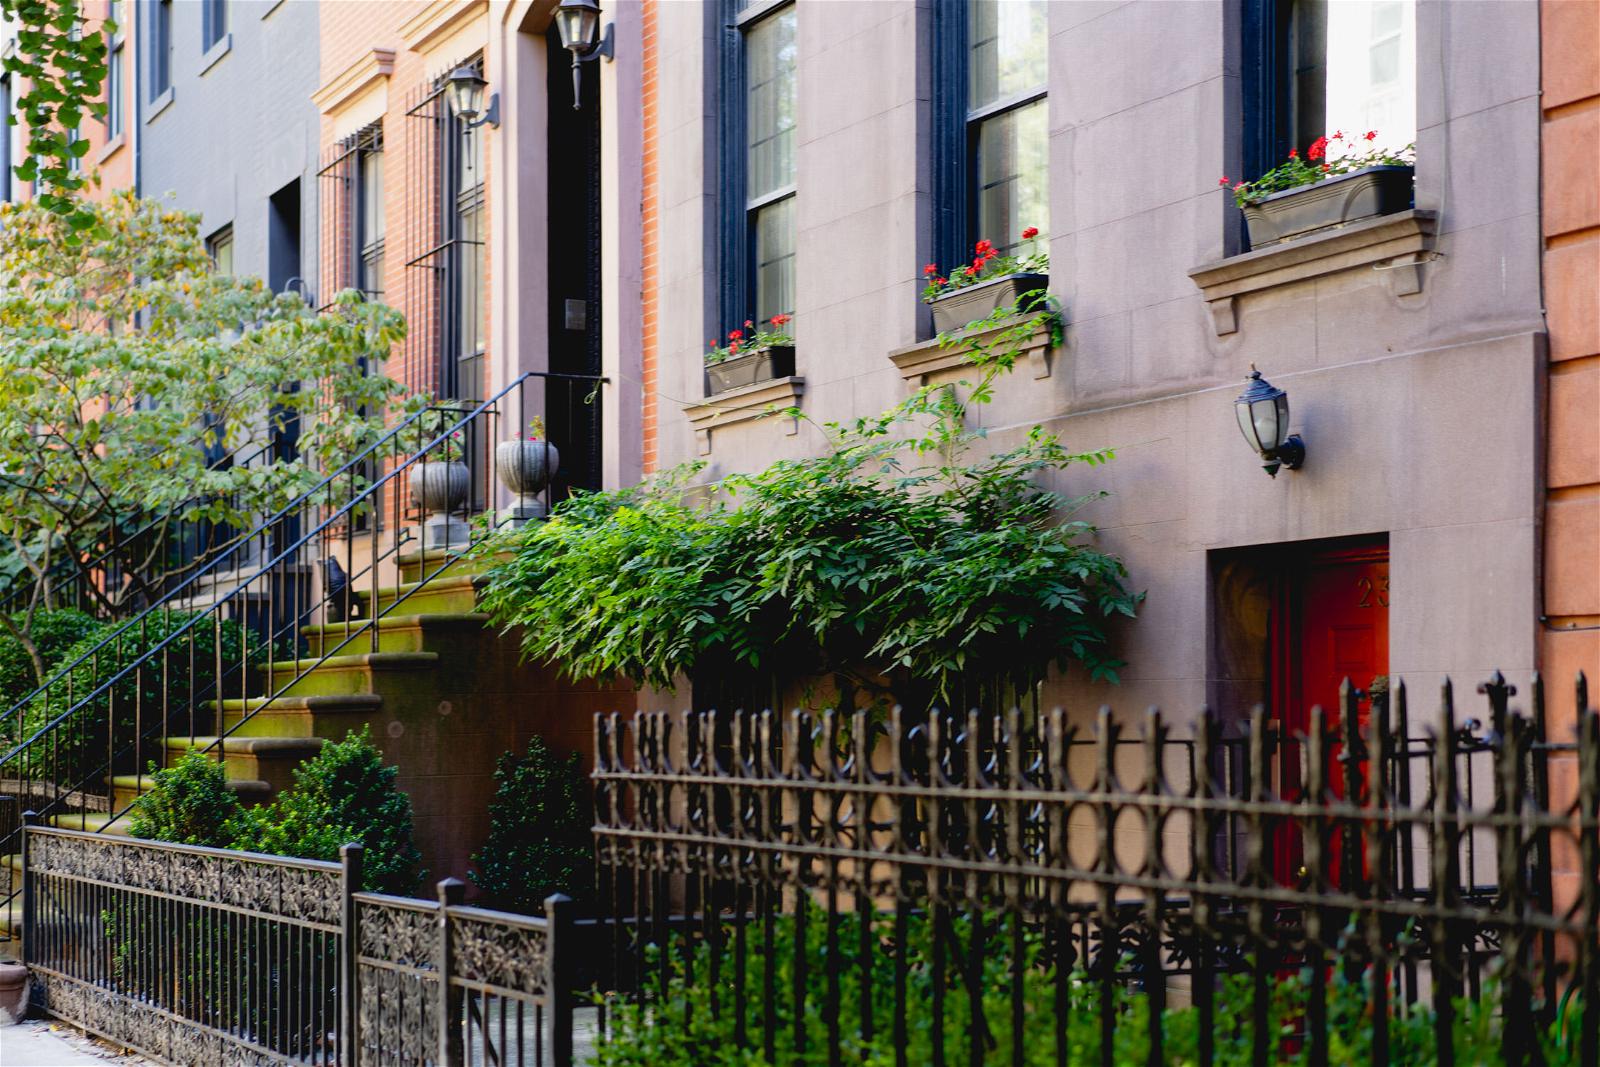 Photos of a Sunny Day Walking in NYC Neighborhoods